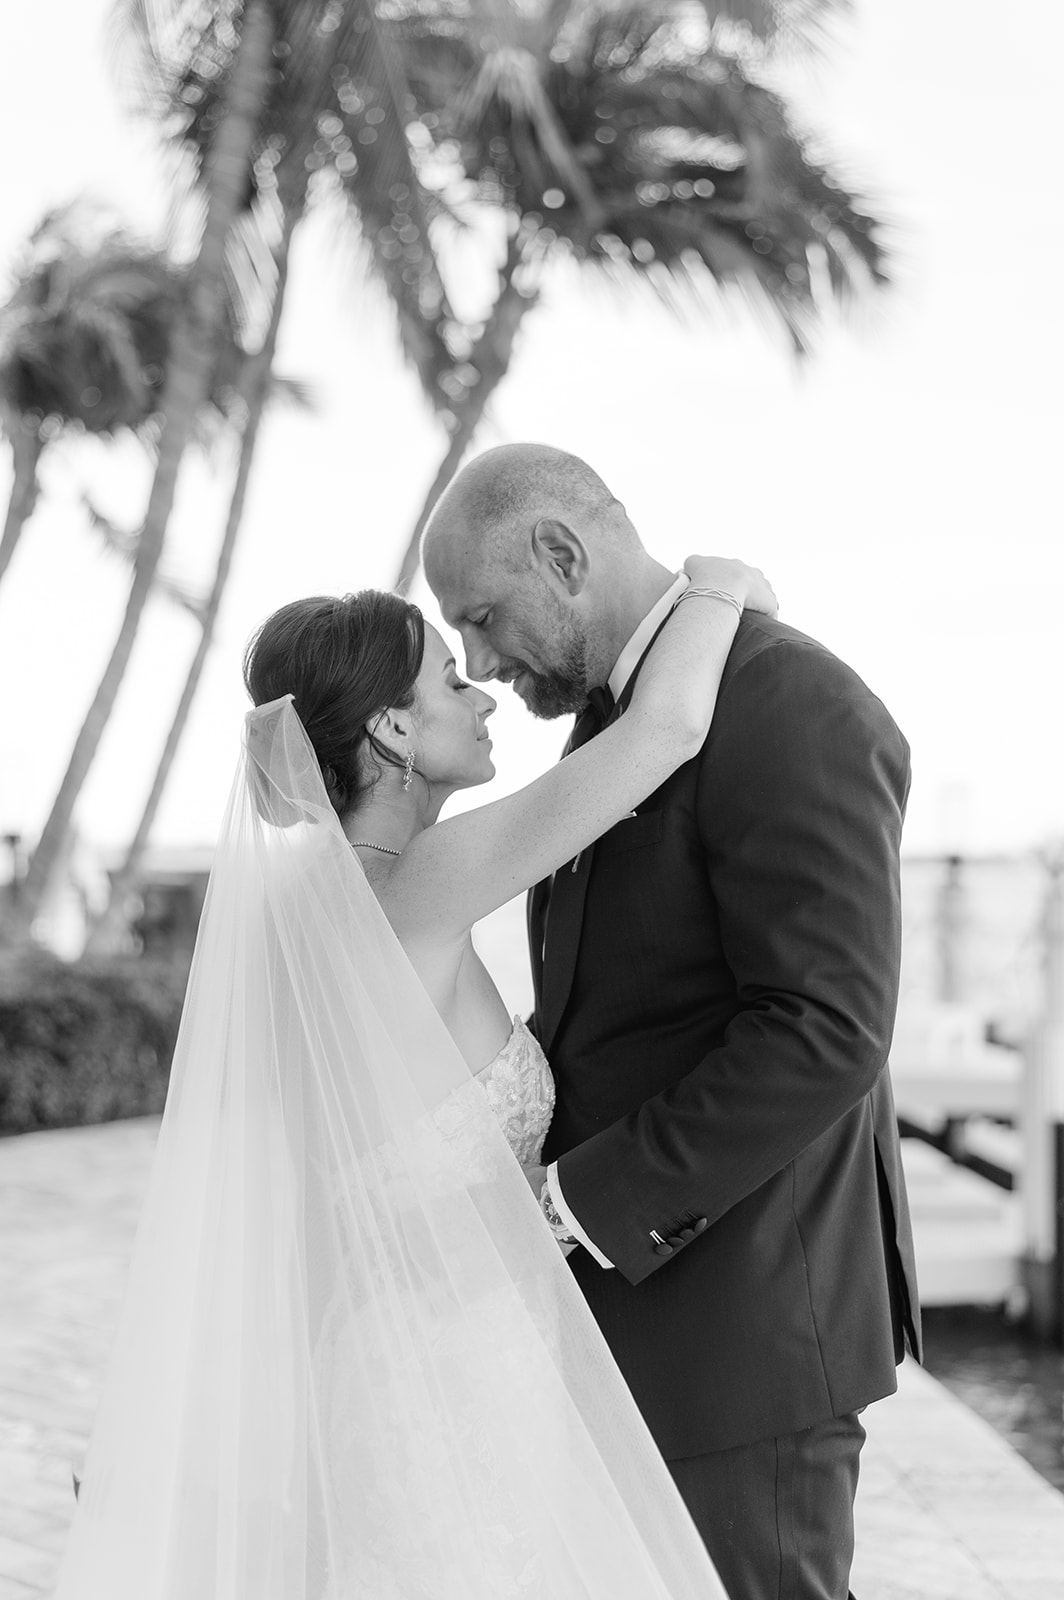 Naples Florida Fine Art Wedding Photographer - A Personal Touch for Your Special Day
